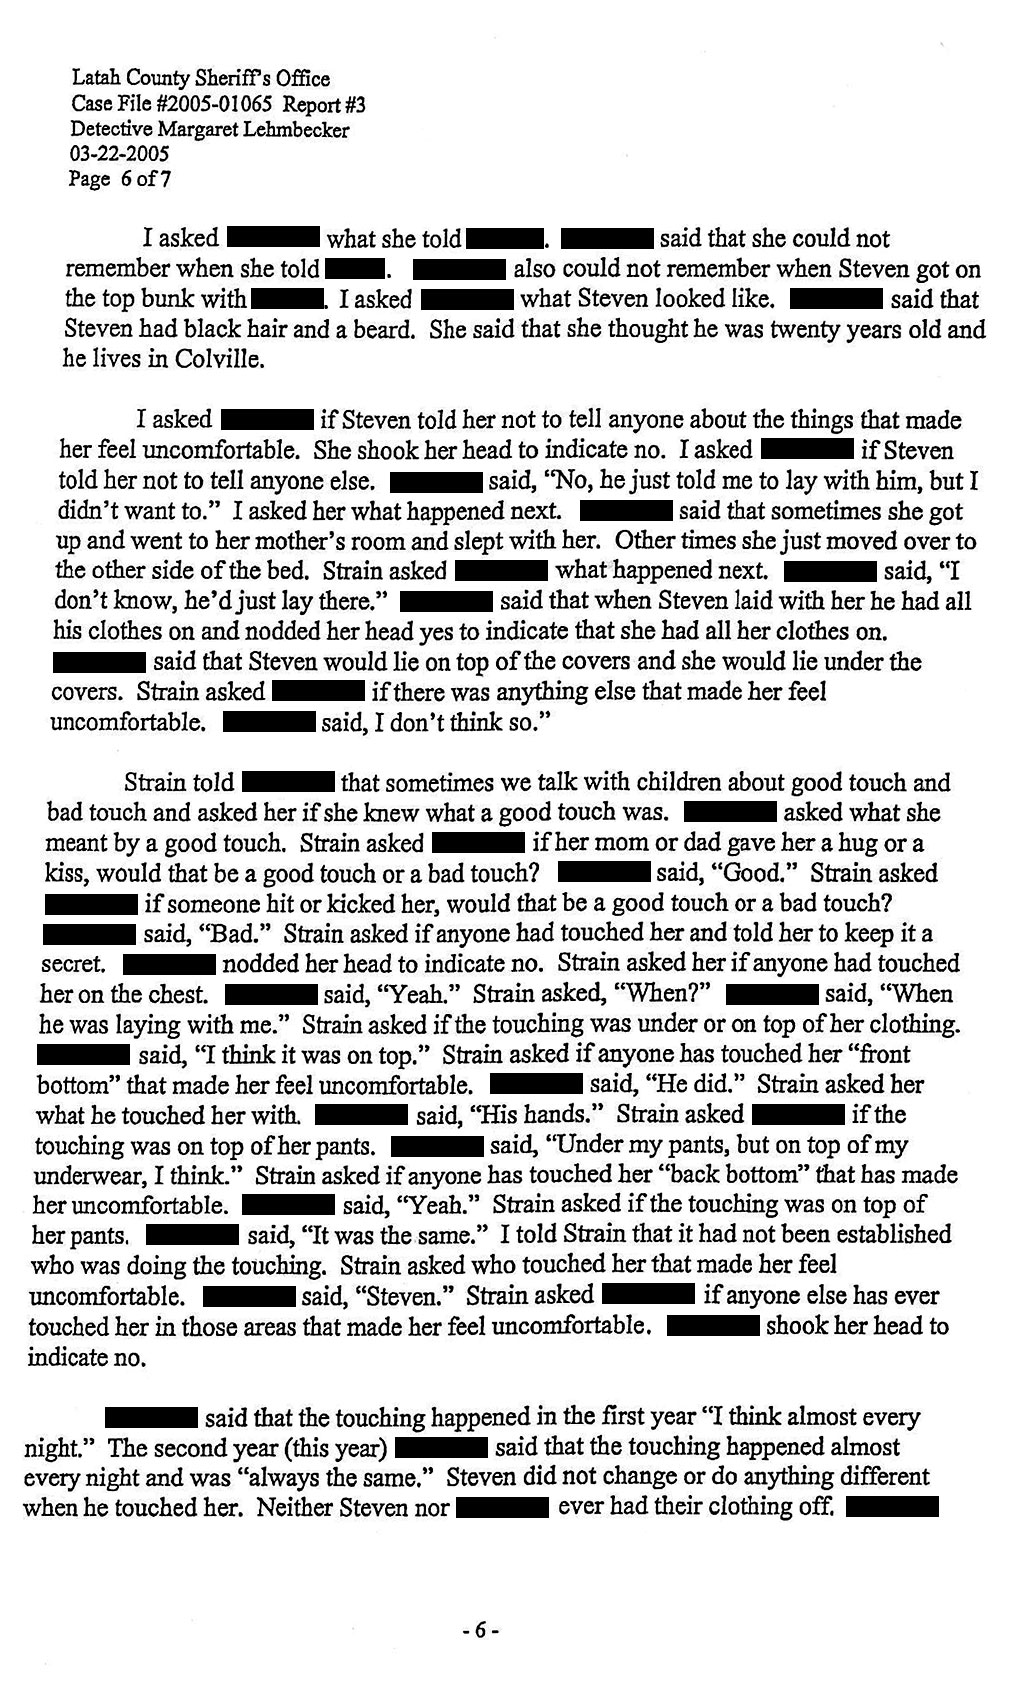 Report #3 page 6 of 7: “I think almost every night.”